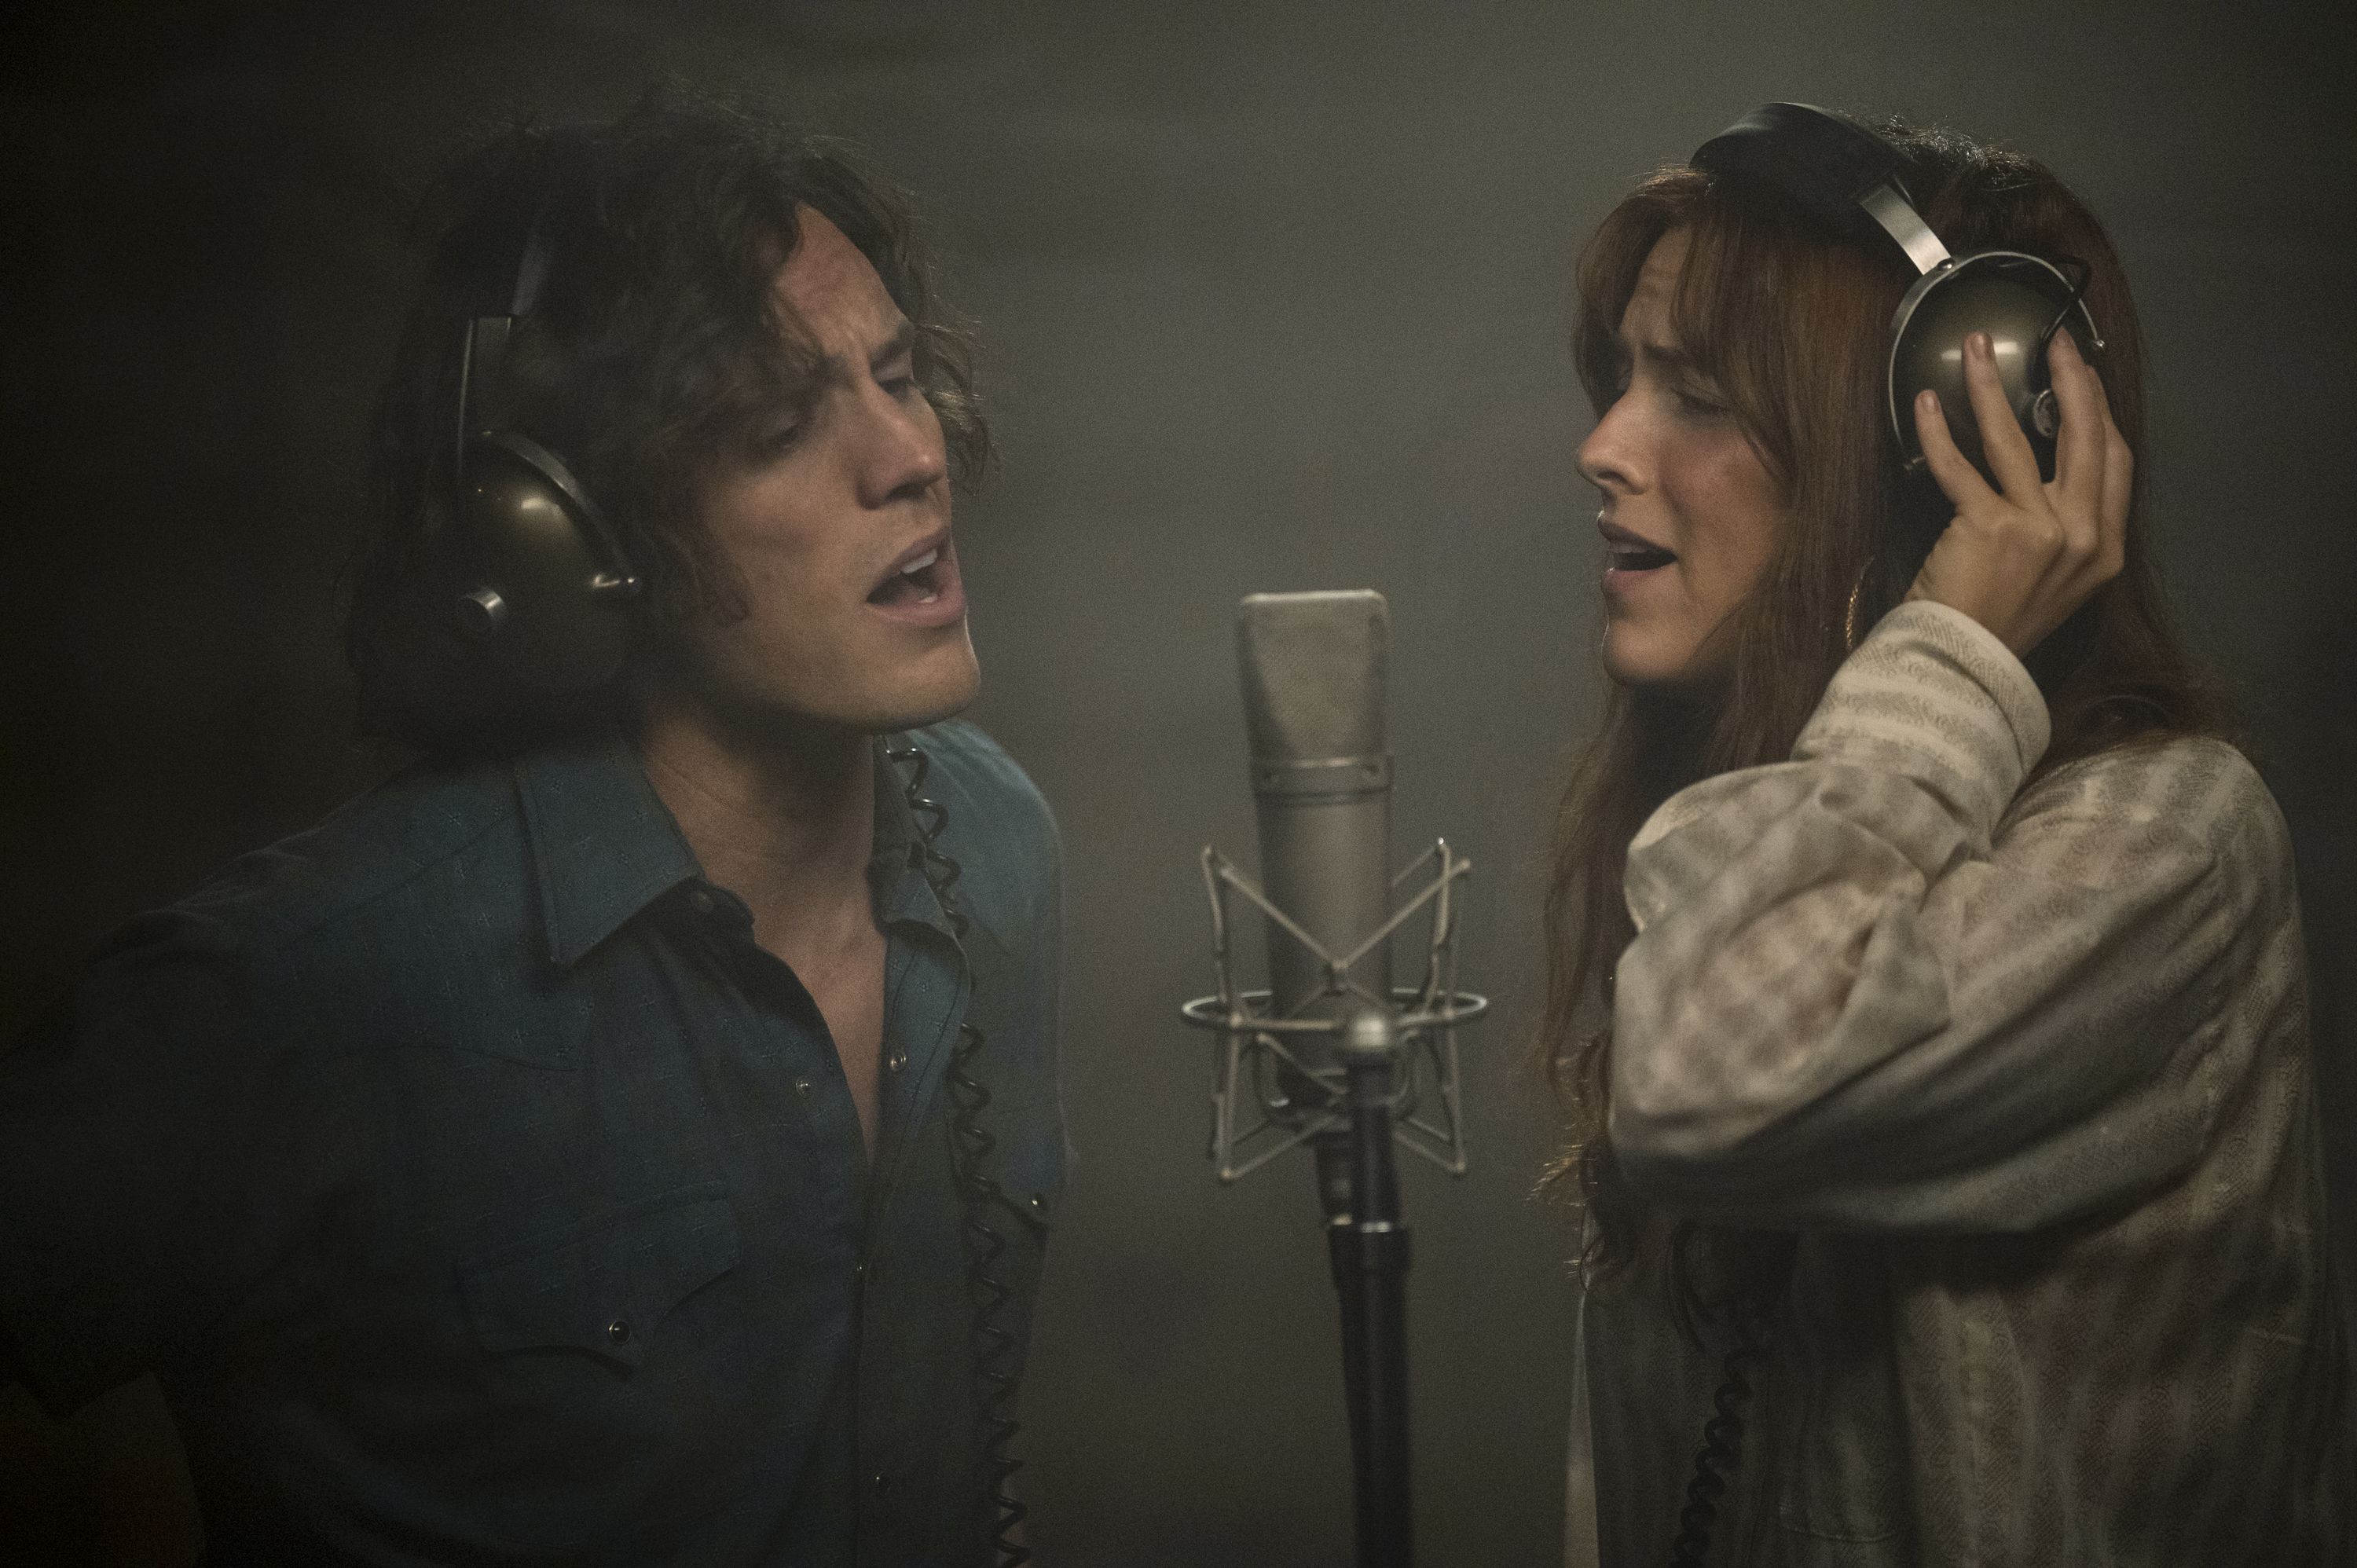 Riley Keough and Sam Claflin on Making Memorable Music Together in Daisy  Jones & the Six